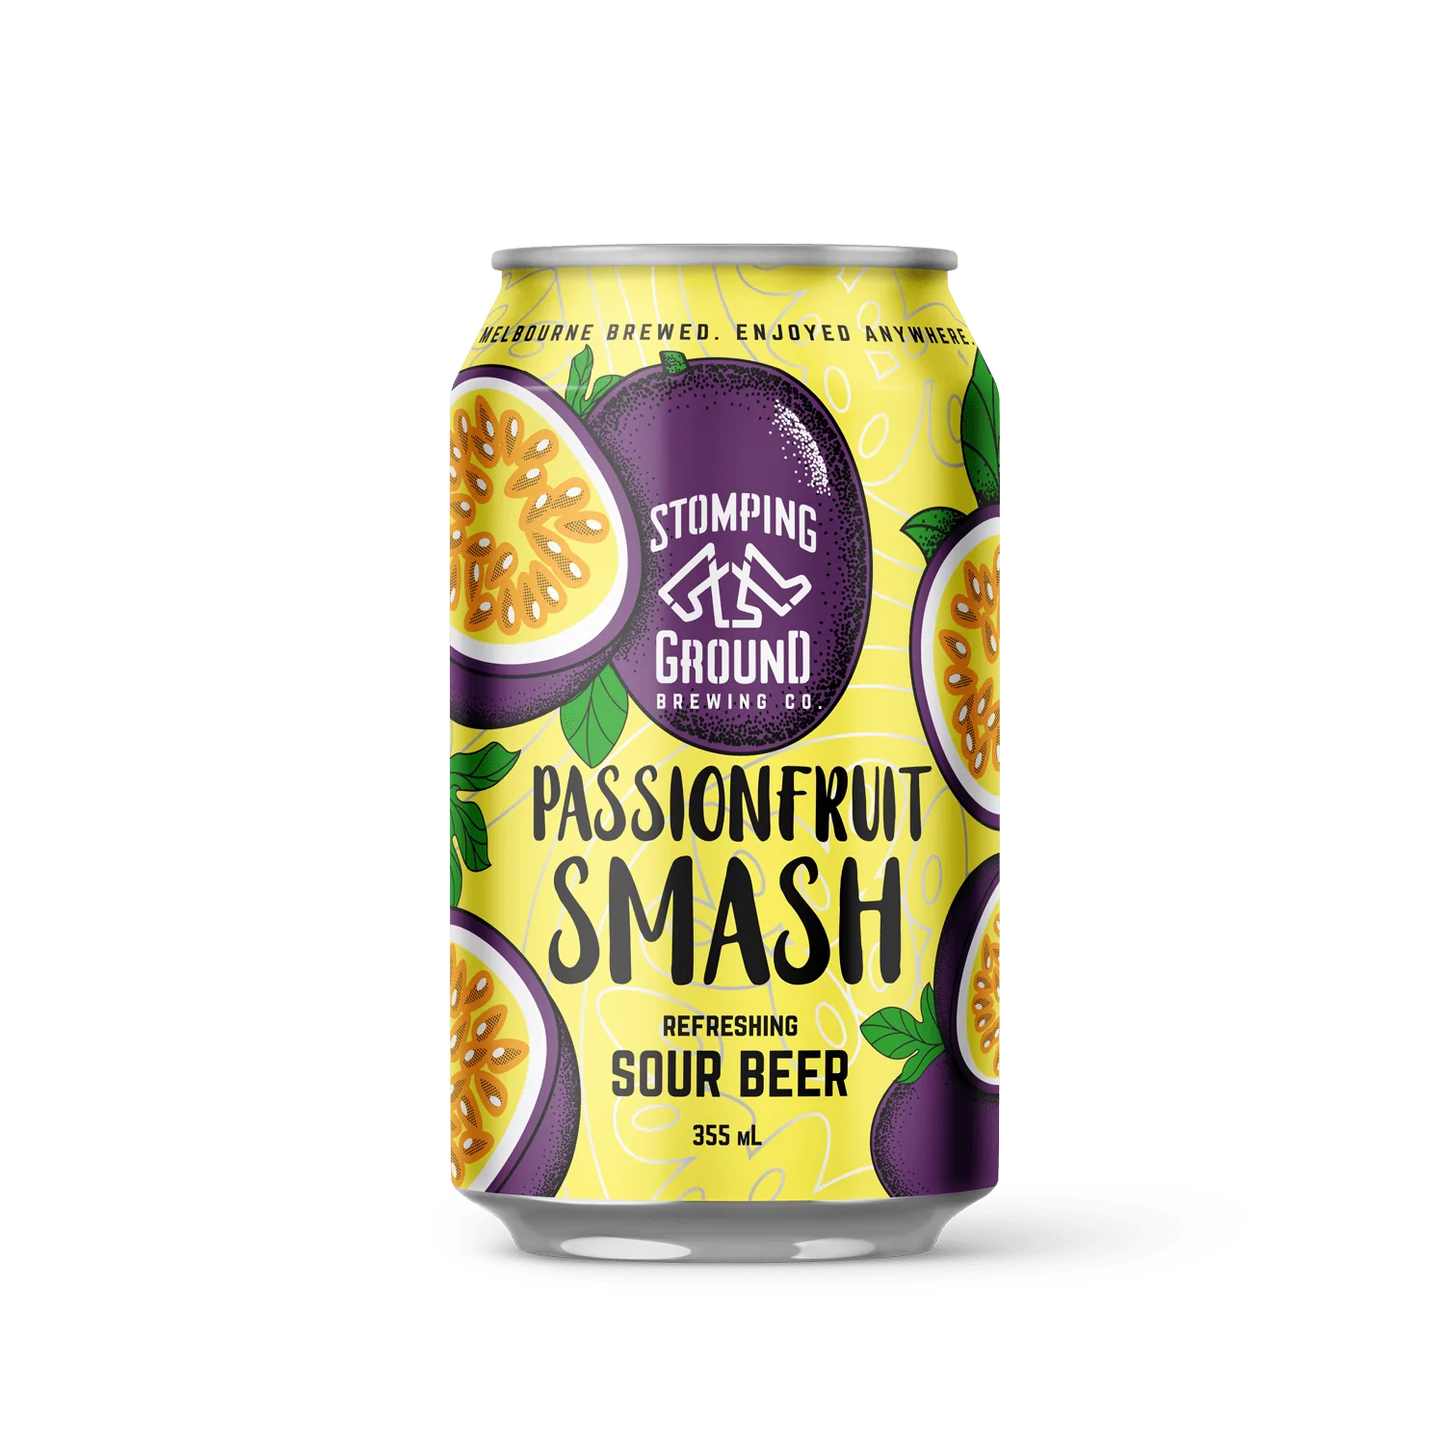 Stomping Ground Passionfruit Smash 355ml can